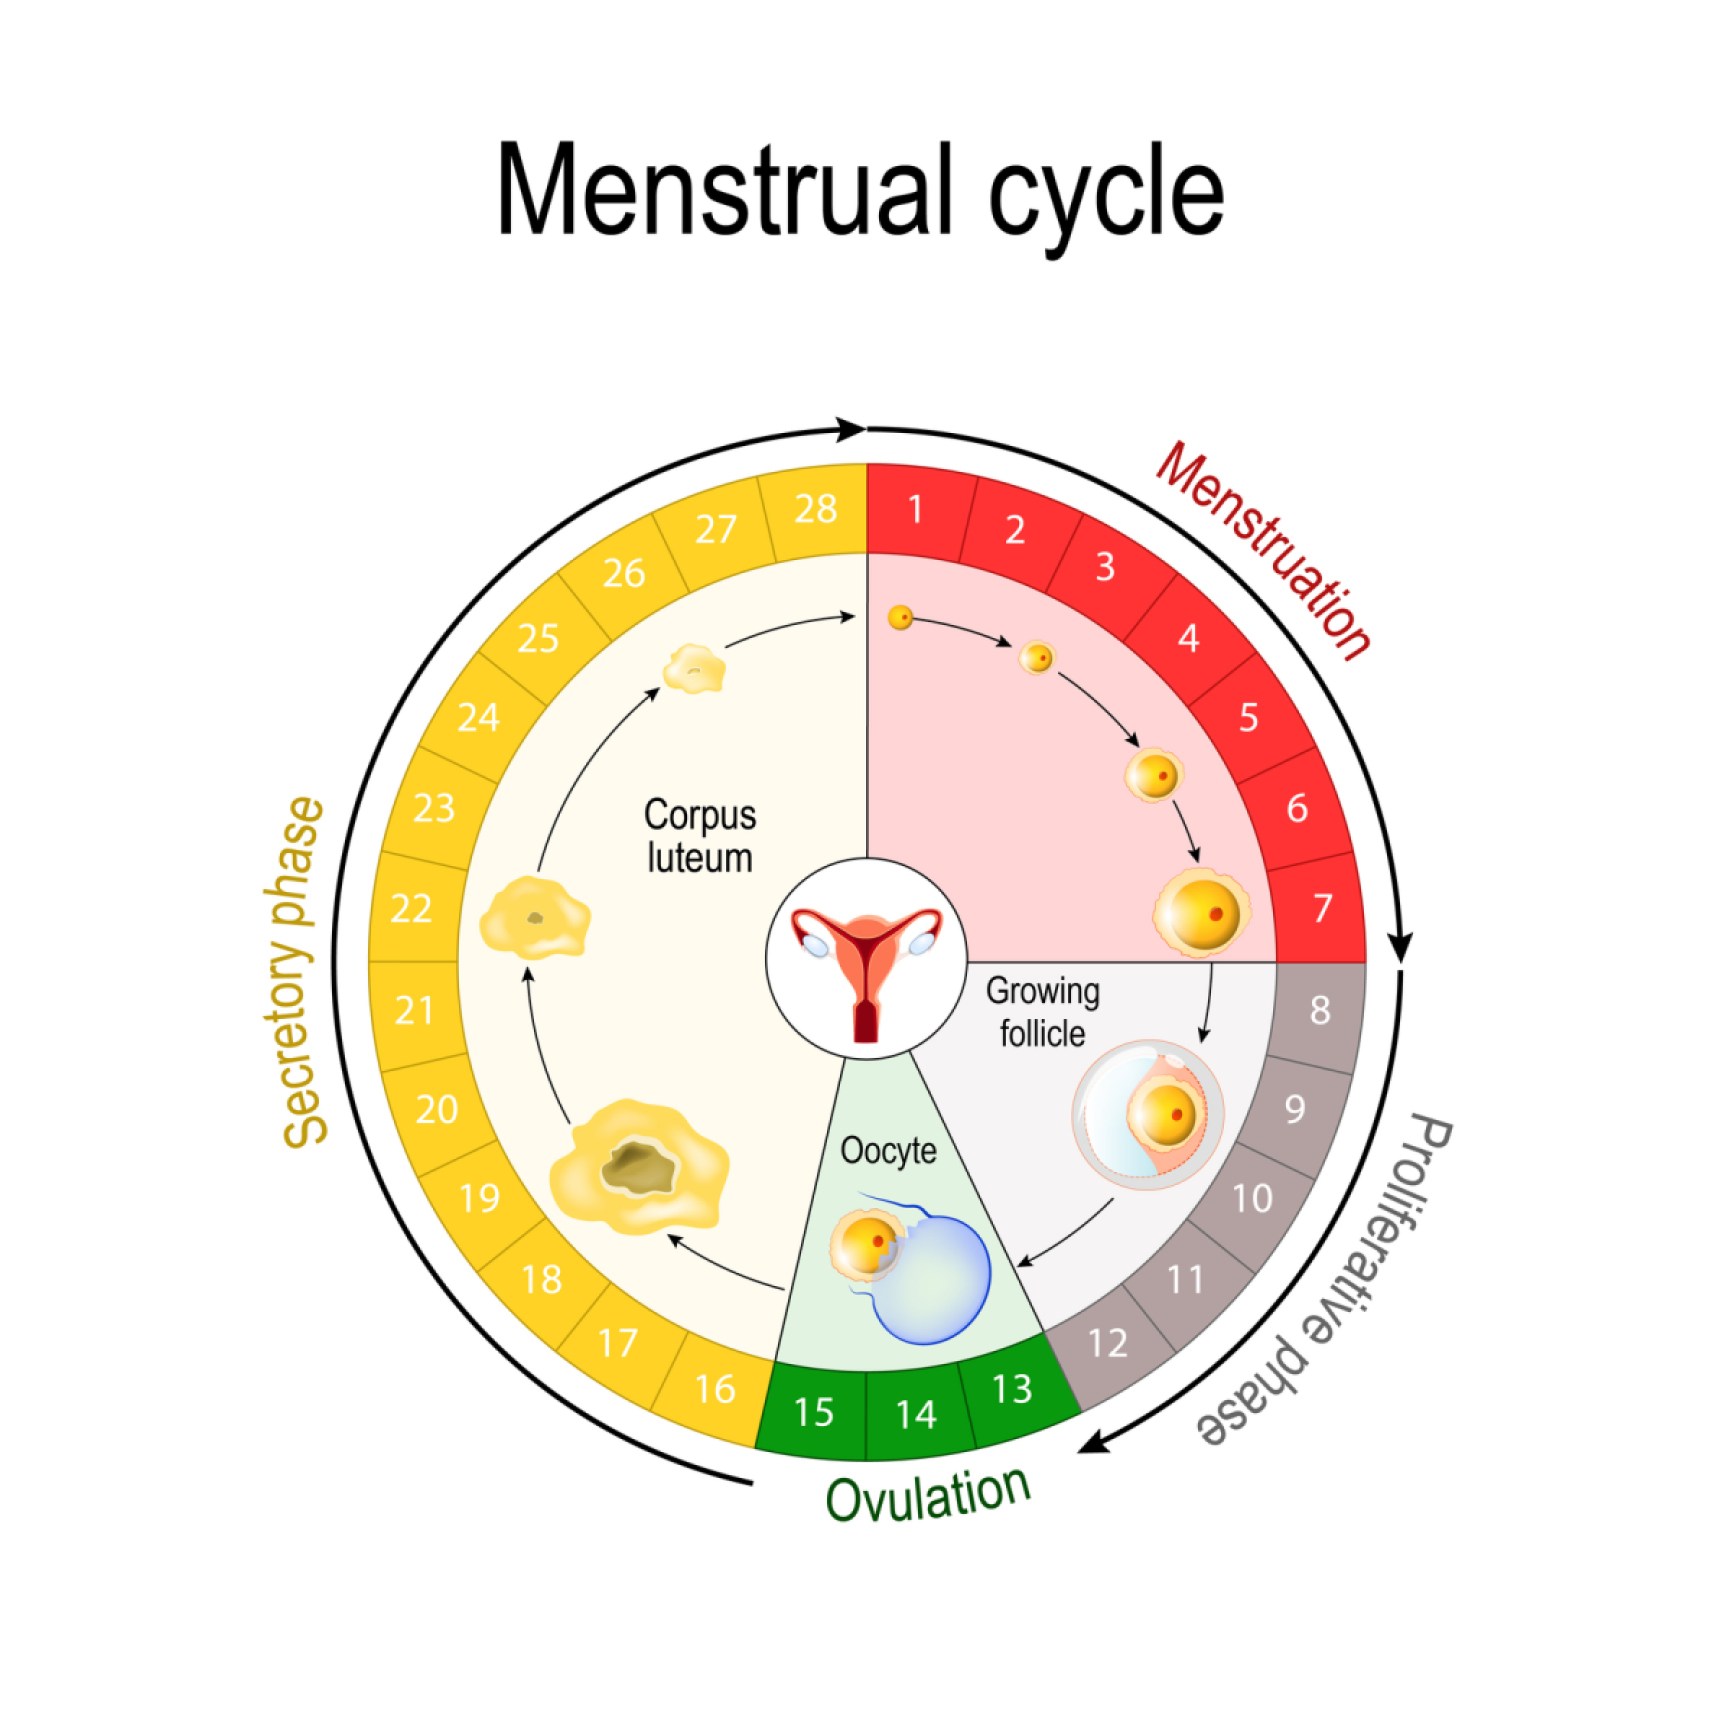 Menstrual cycle chart showing the stages of a cycle in a round graph.